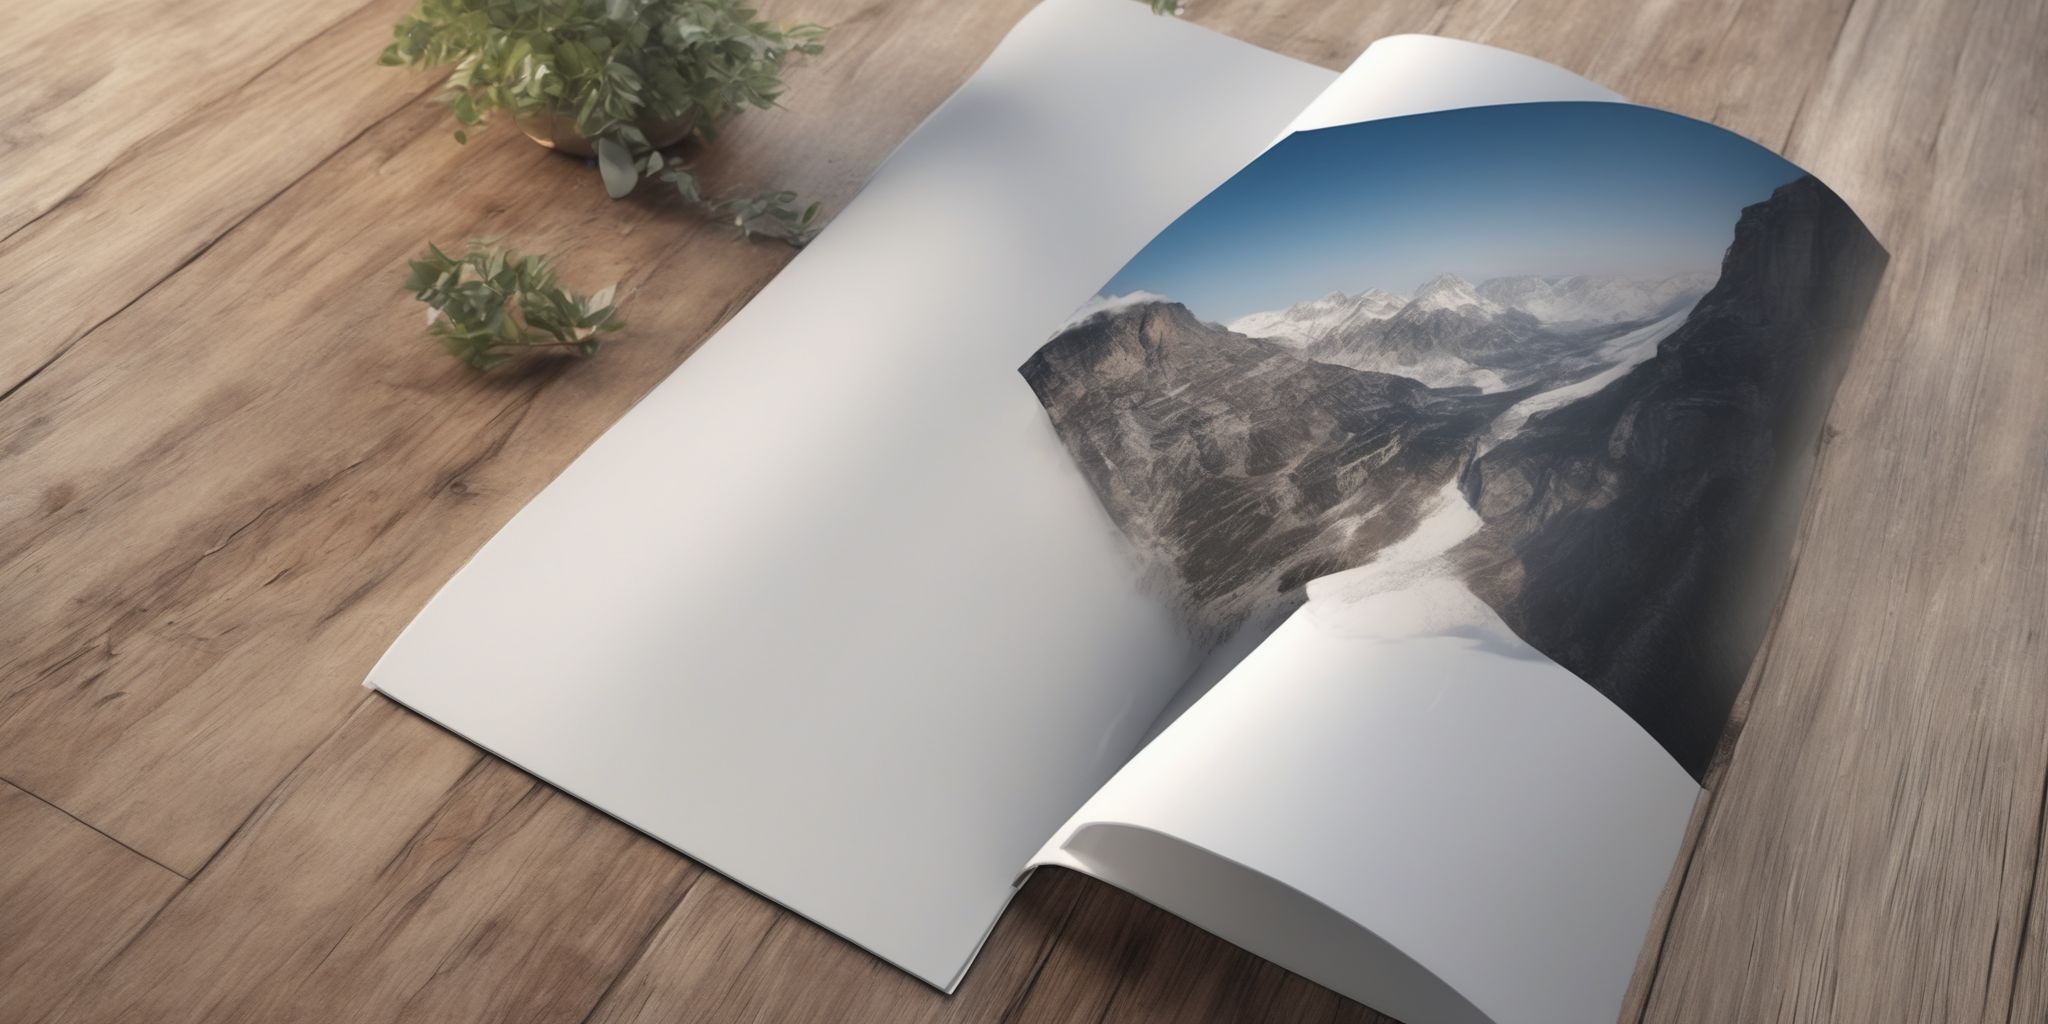 Folder  in realistic, photographic style